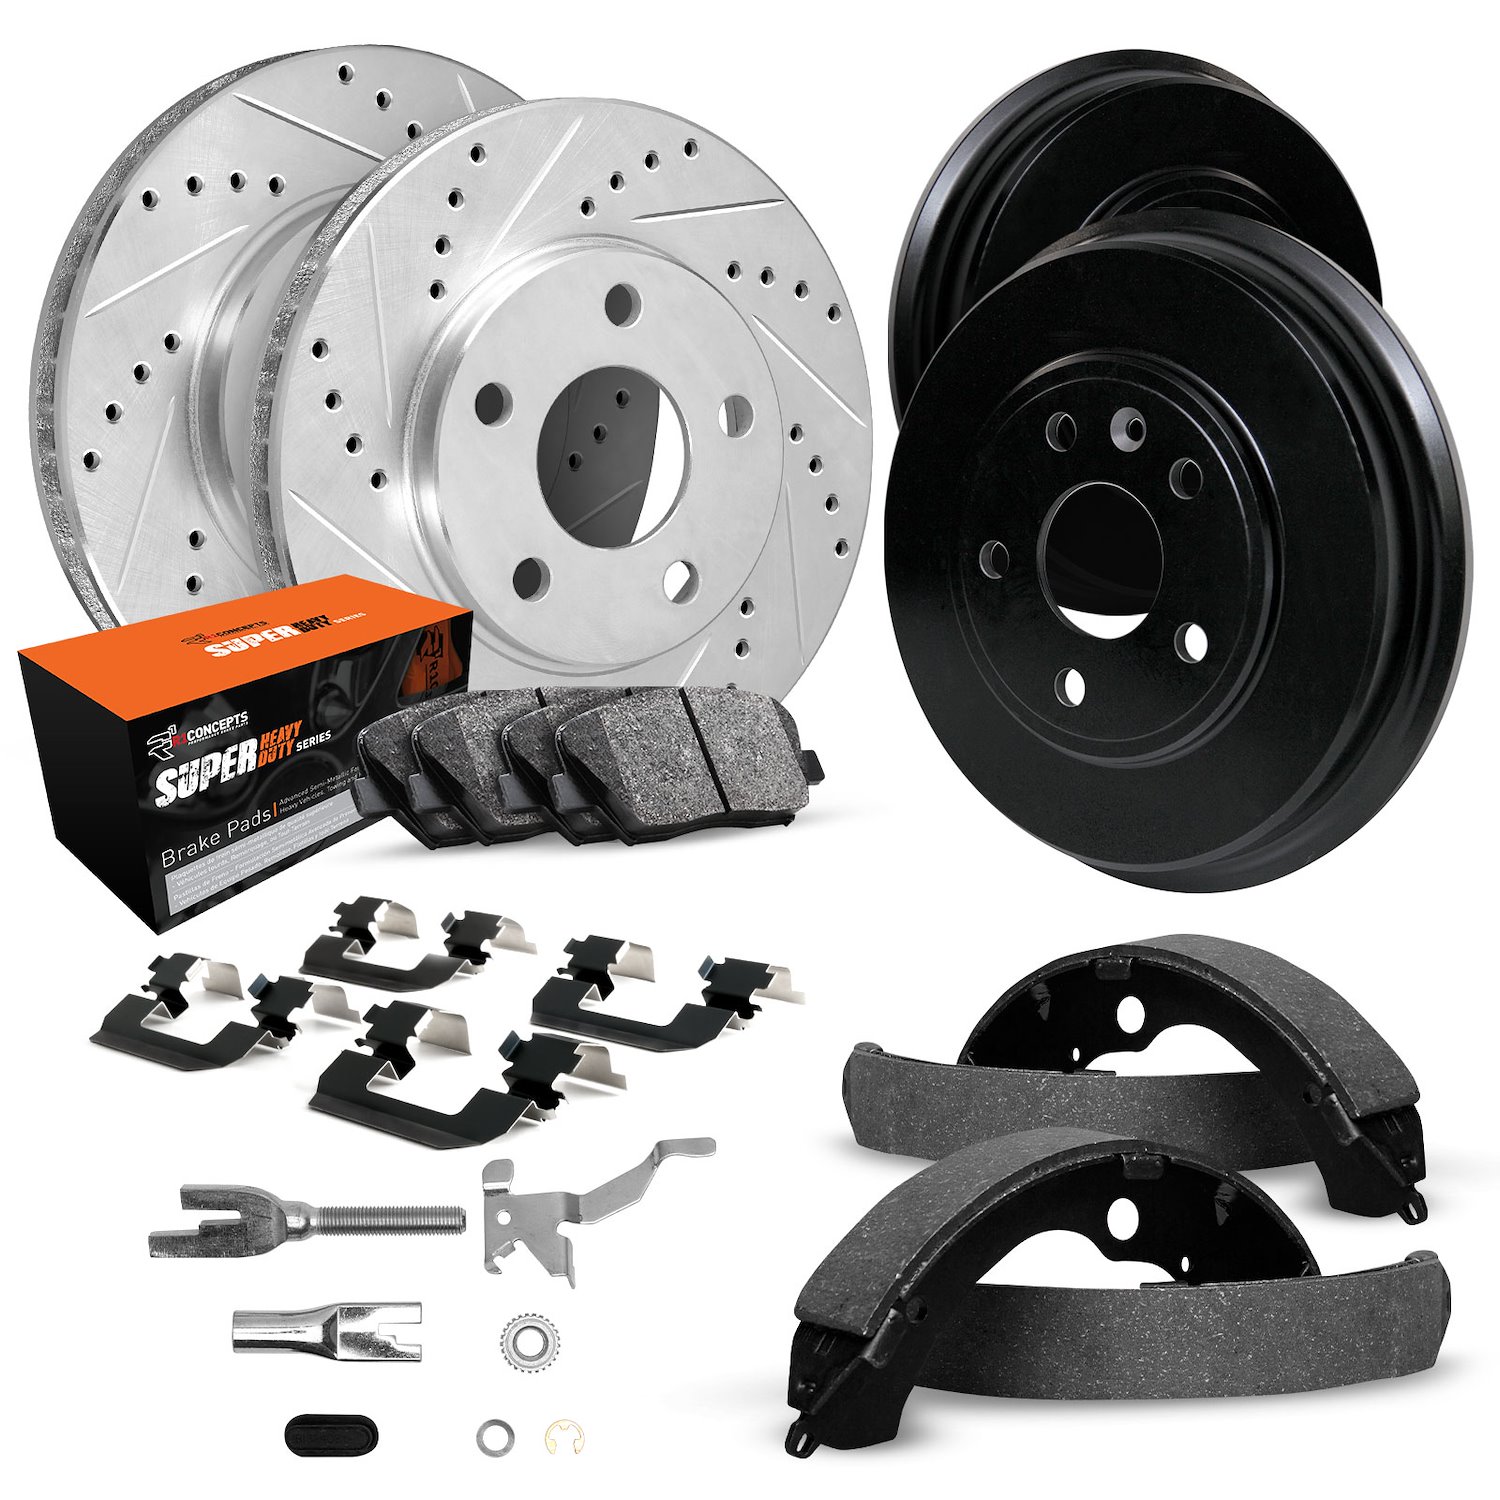 E-Line Drilled/Slotted Silver Rotor & Drum Set w/Super-Duty Pads, Shoes/Hardware/Adjusters, 1997-2004 Ford/Lincoln/Mercury/Mazda